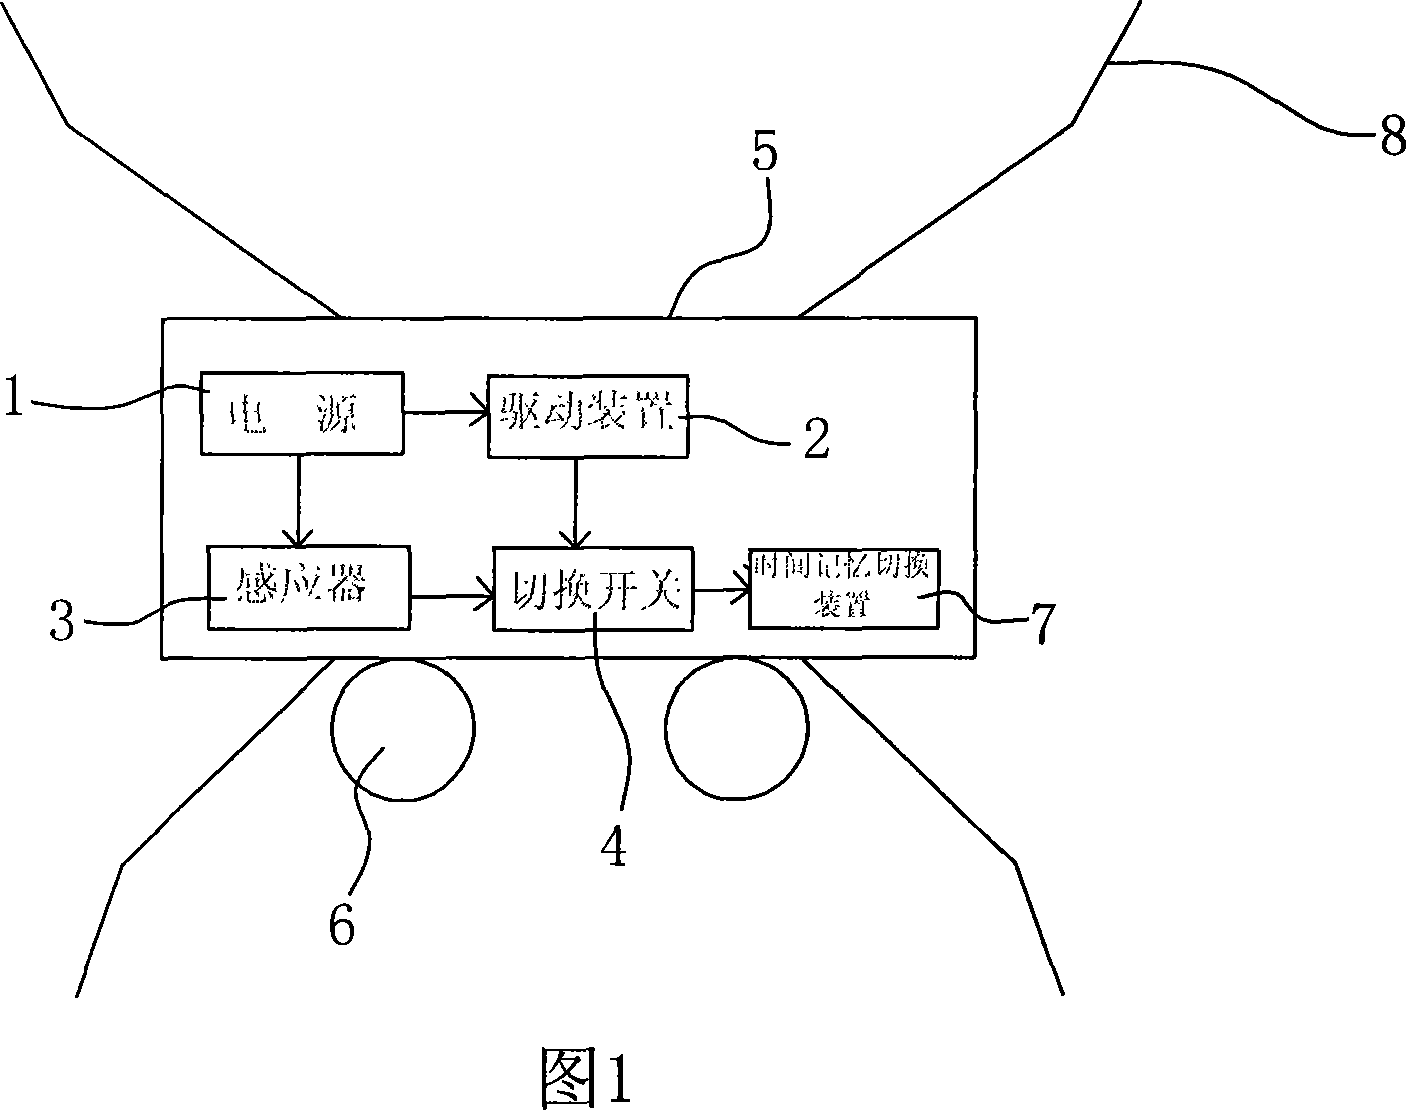 Automatic induction bird driver for power transmission line